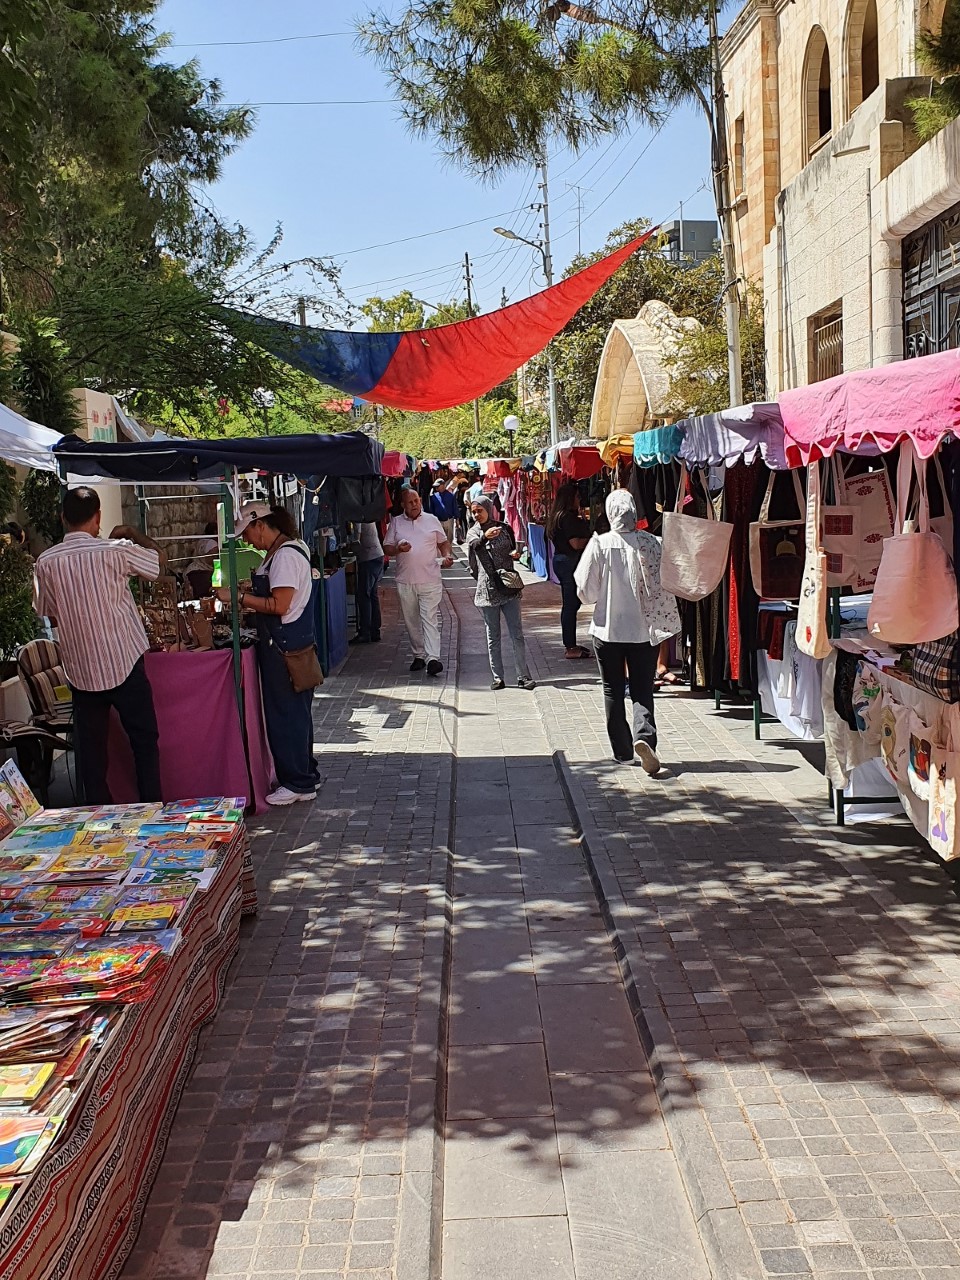 Souk Jara has become a landmark and a space for visitors and livelihood seekers